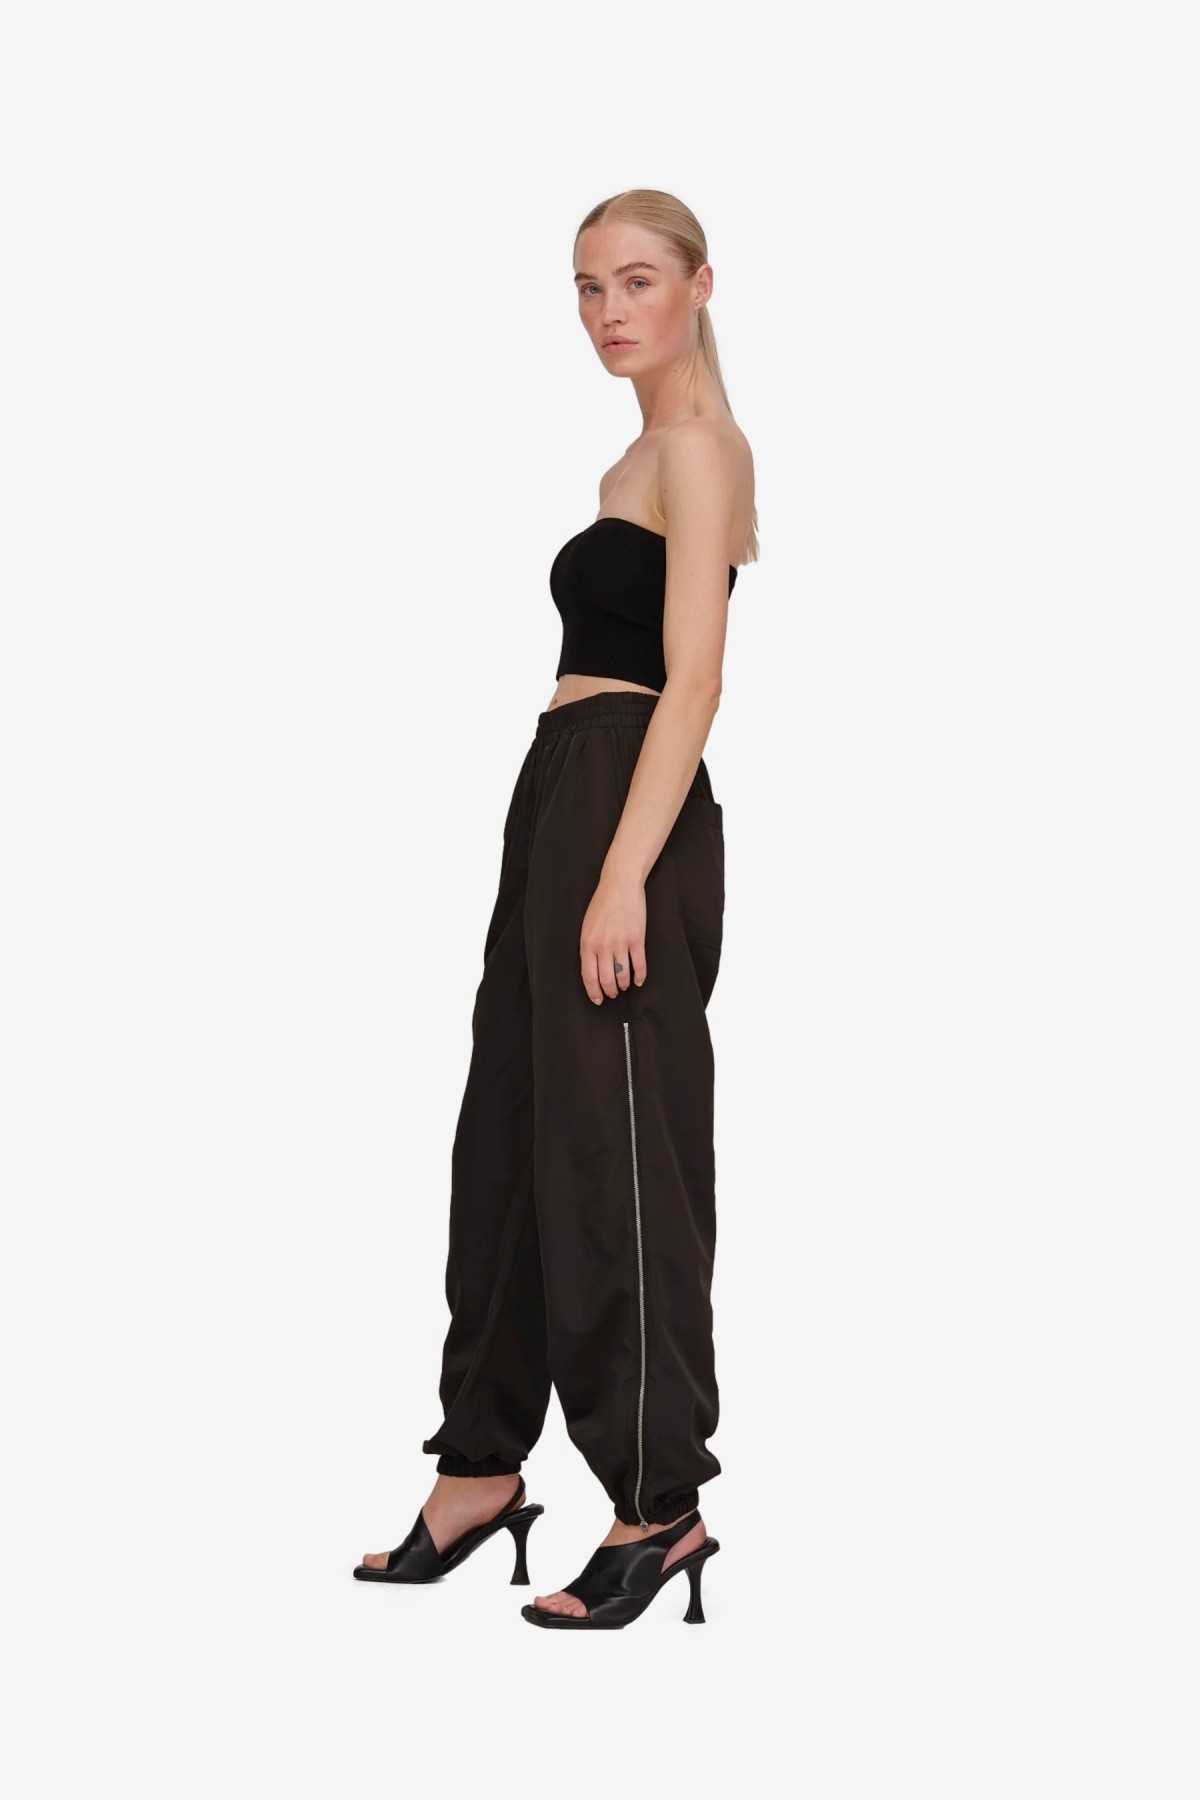 Herskind Tracy Pants in Black